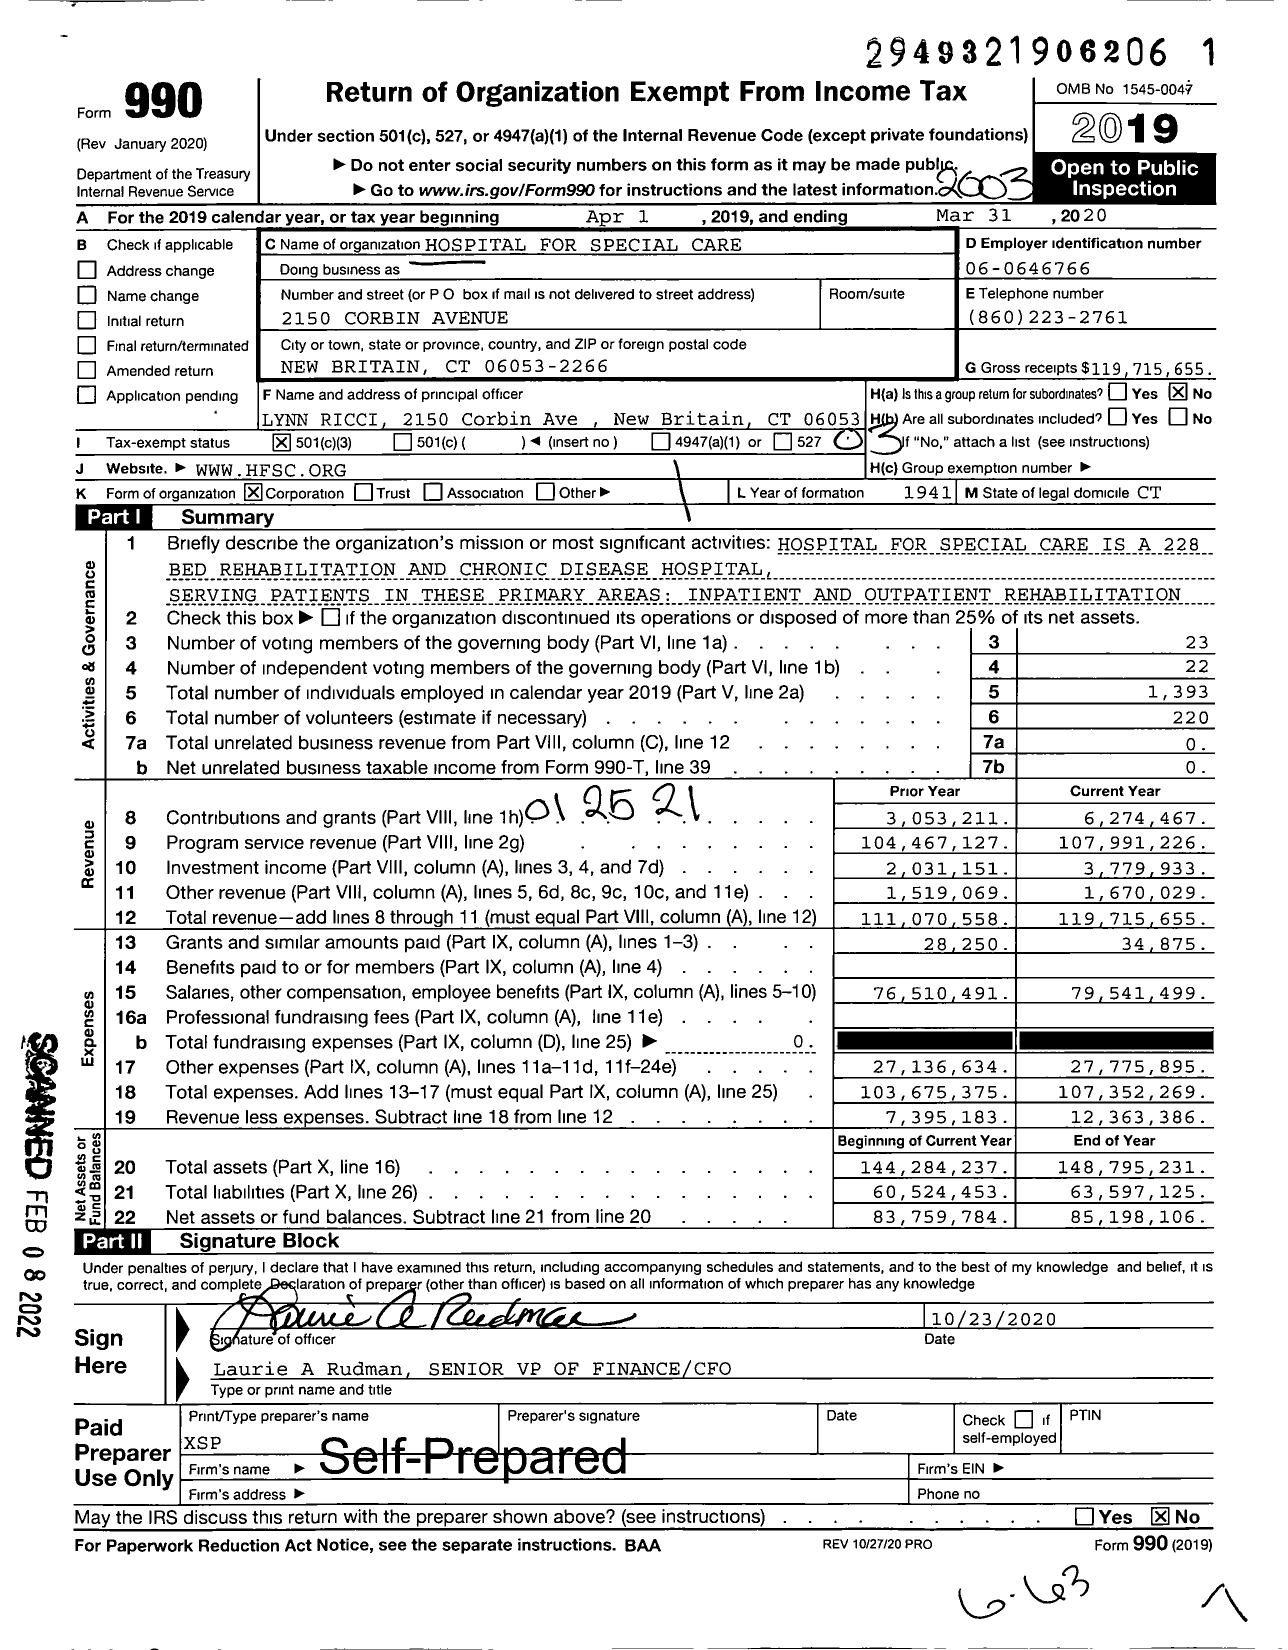 Image of first page of 2019 Form 990 for Hospital for Special Care (HSC)